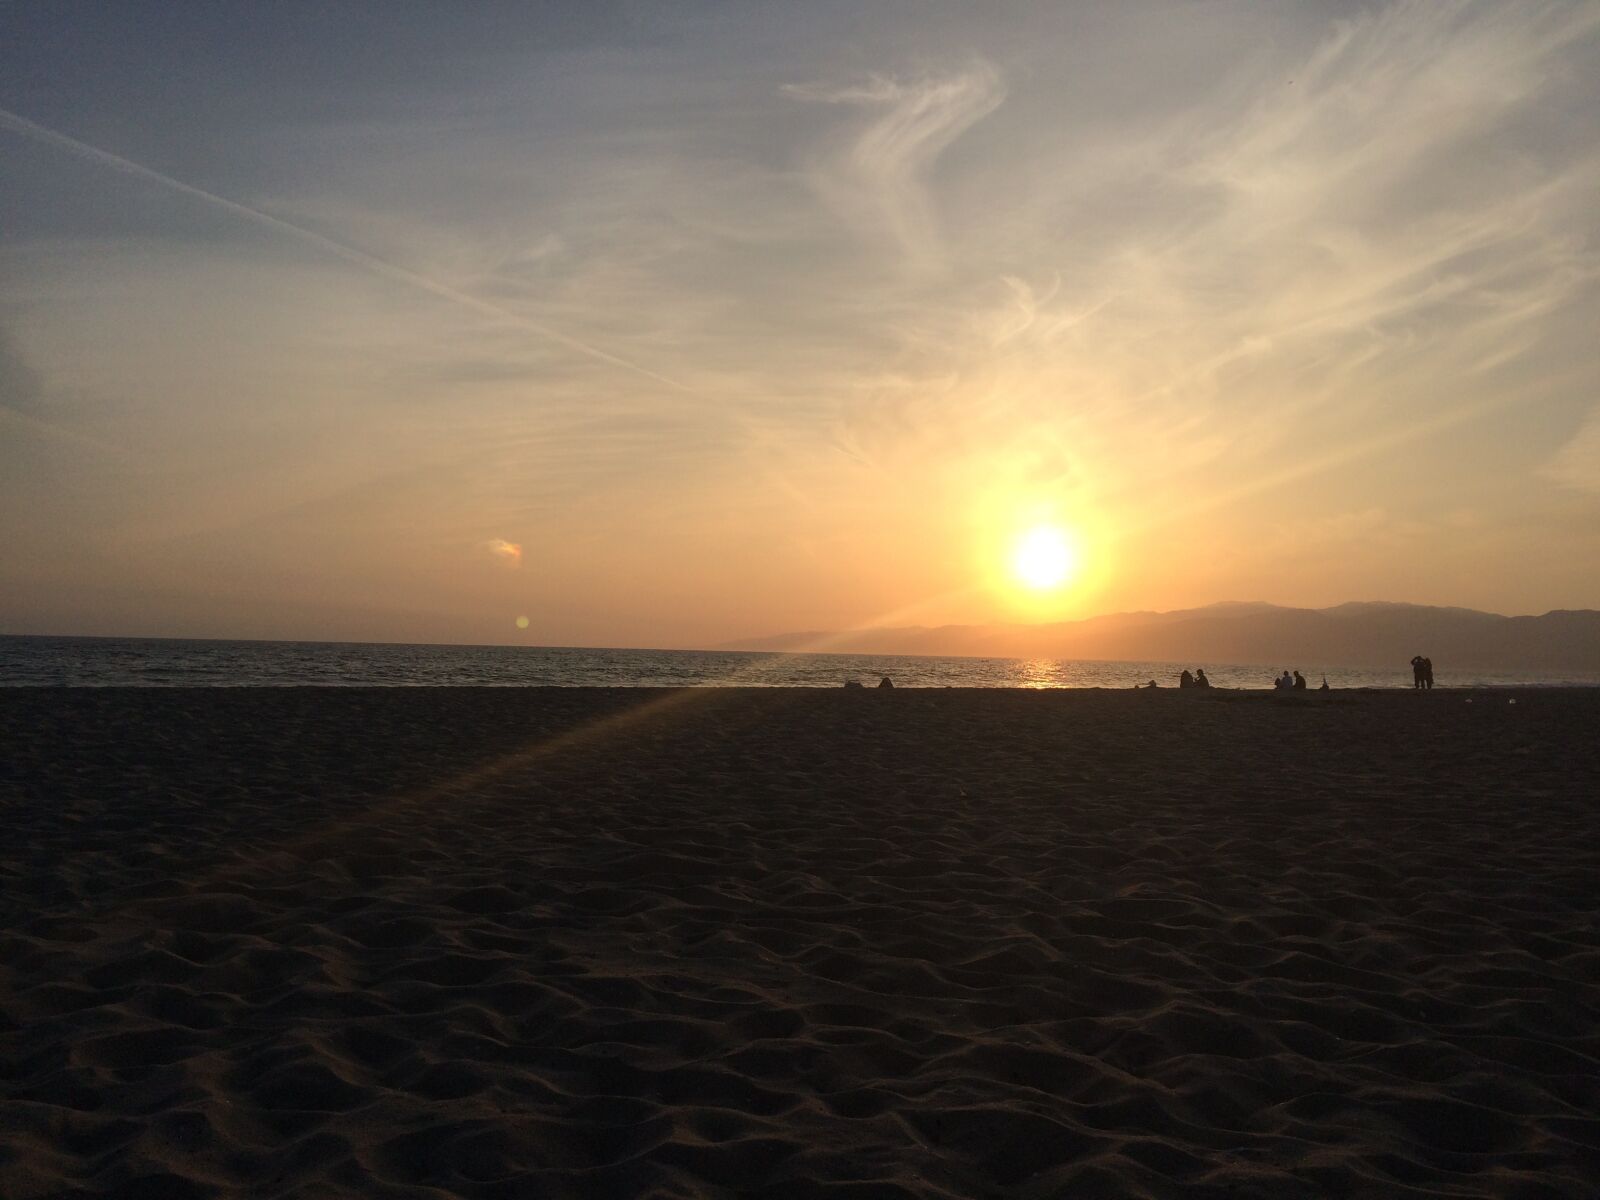 Apple iPhone 5s + iPhone 5s back camera 4.15mm f/2.2 sample photo. Sunsets, beach, sand photography